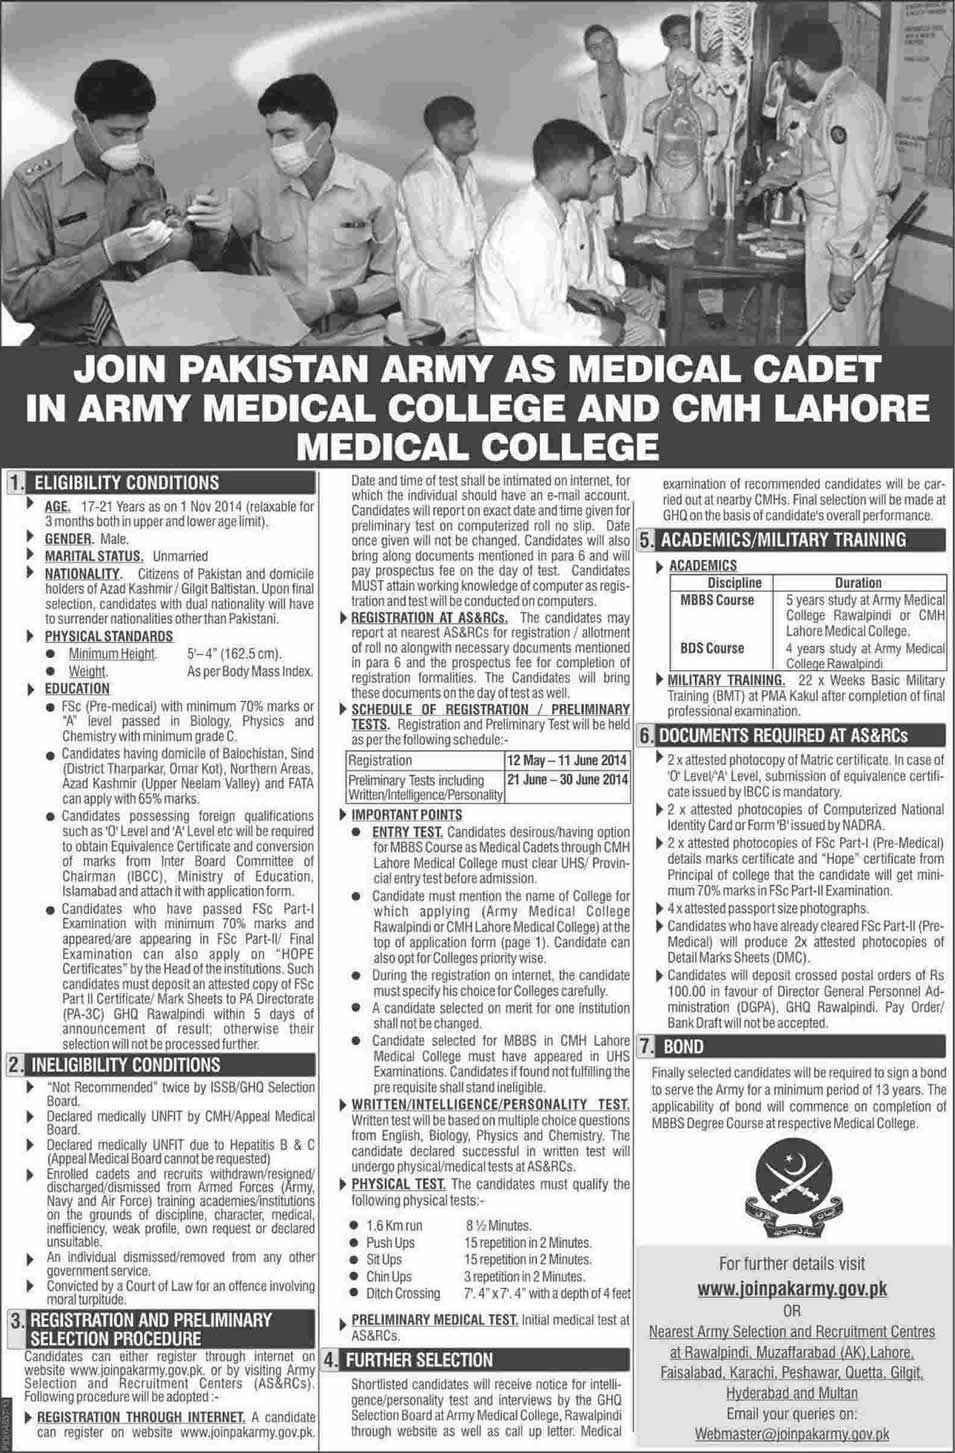 Join Pakistan Army 2014 May as Medical Cadet Latest Advertisement